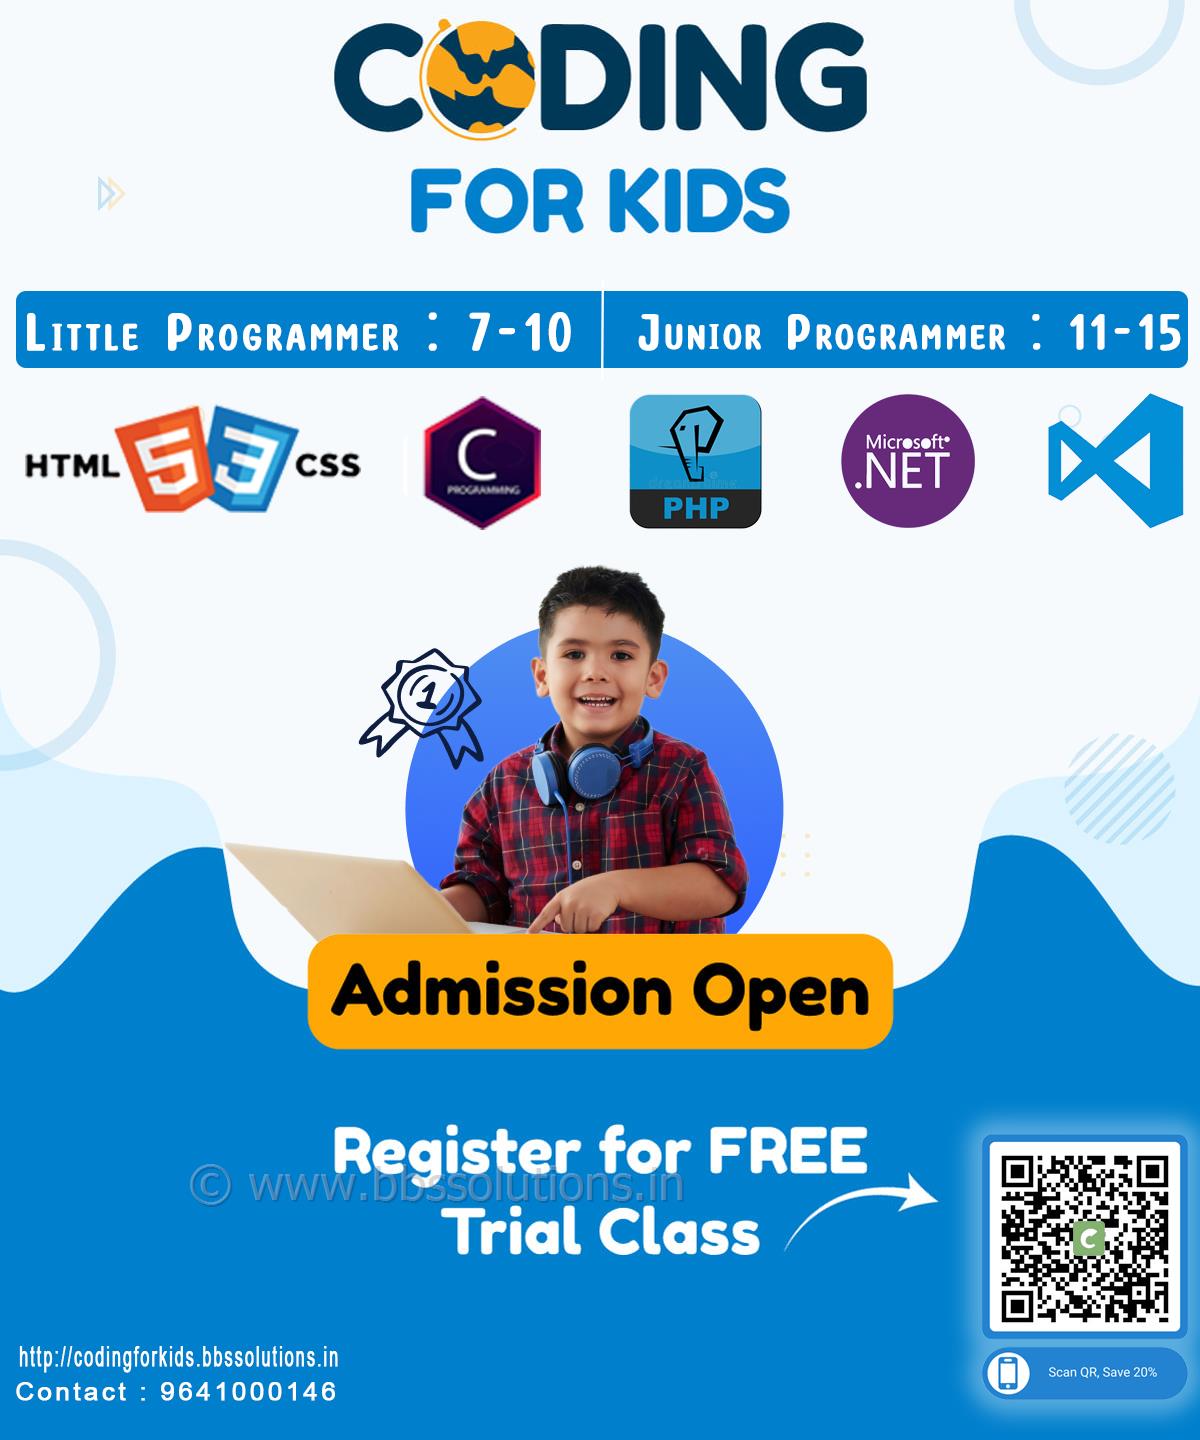 Coding for Kids: The Best Coding Classes in Dhupguri, Jalpaiguri, Sili...  Business Boost Software Solutions do Best Software ,Web Development,Mobile App solutions provider in siliguri , india, WestBengal , Assam , Siliguri , Jalpaiguri ,Dhupguri,
    Best website designing in Siliguri with affordable packages and quick support. Get effective website design in Siliguri from best website designers. #bbssolutions , #SEO  , #DigitalMarketing  , #WebDesign  , #SoftwareDevelopment  , #FacebookAds  , #GoogleAds  , #GoogleSEO  , #WebsiteDesigning 
     , #Software  , #website  , #BusinessBoostSoftwareSolutions  , bbssolutions,SEO, Digital Marketing, WebDesign, Software Development, Facebook Ads, Google Ads, Google SEO, Website Designing, 
    Software, website, Business Boost Software Solutions, 9641000146,7478180650,best GST software in West bengal,Best GST software company in north bengal,GST solution in west bengal
    ,gst solutions in north bengal,best customize software in siliguri , india,best customize software in west bengal,best customize software in dhupguri,news portal website in west bengal
    ,news portal website in siliguri , india,regional news portal website in siliguri , india,school software in west bengal,school software in north bengal,school website in north bengal,
    school software in north bengal,android app, ios app, ecommerce website, ecommerce software,Web designing, website designing, ecommerce website, how to make website, create website, 
    website development company, web page design, seo, search engine optimization, seo siliguri , india , 
    seo company, best seo company, seo services, responsive web design, web designing companies, 
    how to create a website, internet marketing, digital marketing, online marketing, social media marketing, 
    promotion,web designing in Siliguri,web designing in Siliguri siliguri , india,web designing in siliguri , india,GST Software  ,  GST Billing Software  ,  GST Accounting  ,  GST Ready Software,
    software company in siliguri,software company in siliguri siliguri , india,software company in north east siliguri , india,
    school software in siliguri,school software in north east siliguri , india,customize software,free software demo,
    reasonable price software,cost effective software,resonable price software,free demo software,free software,best software support,free software support,best software company in siliguri , india,
    best software company in siliguri,MLM Software company in Siliguri,Binary Software company in Siliguri,
    top ten software company in north bengal,top ten software company in siliguri,top ten software company in siliguri , india,
    top ten software company in north east,software development siliguri , india,west bengal,kolkata,siliguri , software company in siliguri , india
     , software development west bengal , Customized software siliguri , india , software for hotel,medicine distributors,
    jewellery shop , best software company in siliguri,jalpaiguri,sikkim,darjeeling  , Business Boost Softwate Solutions  ,  
    Web designing company in siliguri  ,  ecommerce designing company in siliguri  ,  web development company in siliguri  ,  
    software development comapny in siliguri  ,  software development in sikkim  ,  website designing company in sikkim  ,  
    SEO service in sikkim  ,  web designing company in siliguri  ,  web designing compnay in North Bengal  ,  
    SEO service in siliguri  ,  web designing in north bengal  ,  web designing in north east siliguri , india , website designing in siliguri, best website designing in siliguri, web design, web designer in siliguri, web designing company siliguri